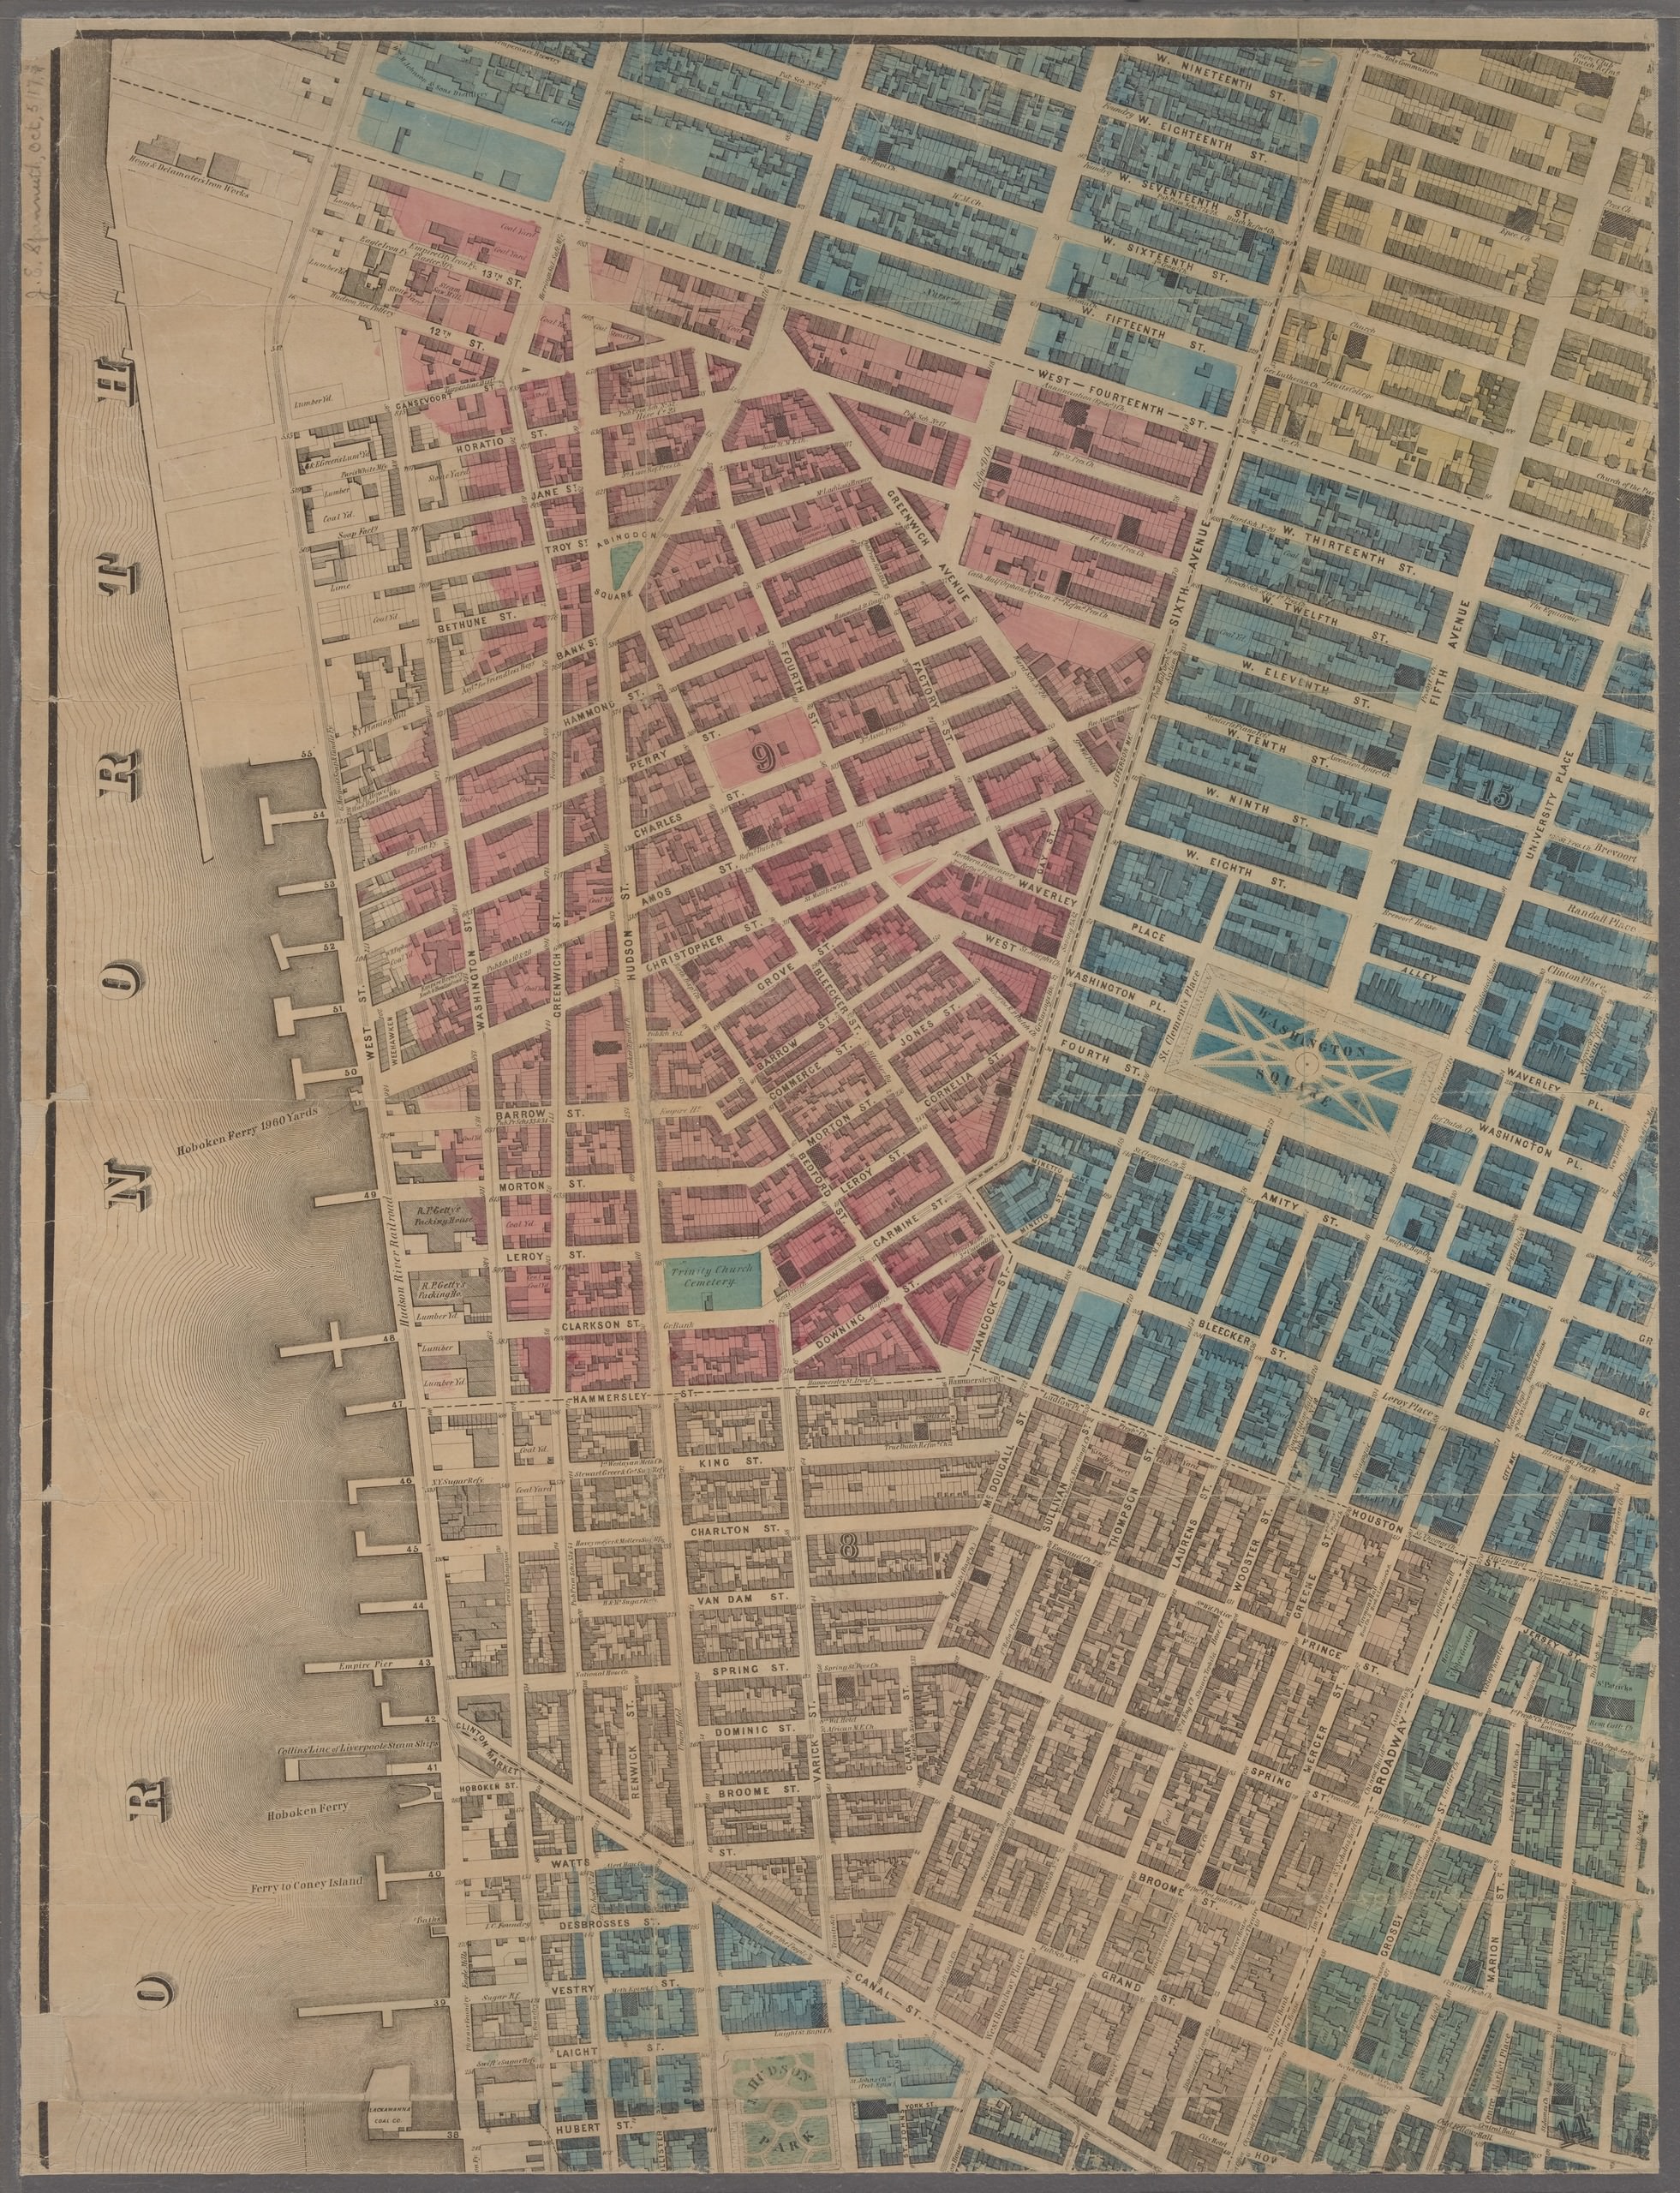  Map showing the old high water line along the shores of Brooklyn &amp; New York together with the pier lines as established by law [cartographic material] / R. Graves, City Surveyor. 1855. Source: NYPL 